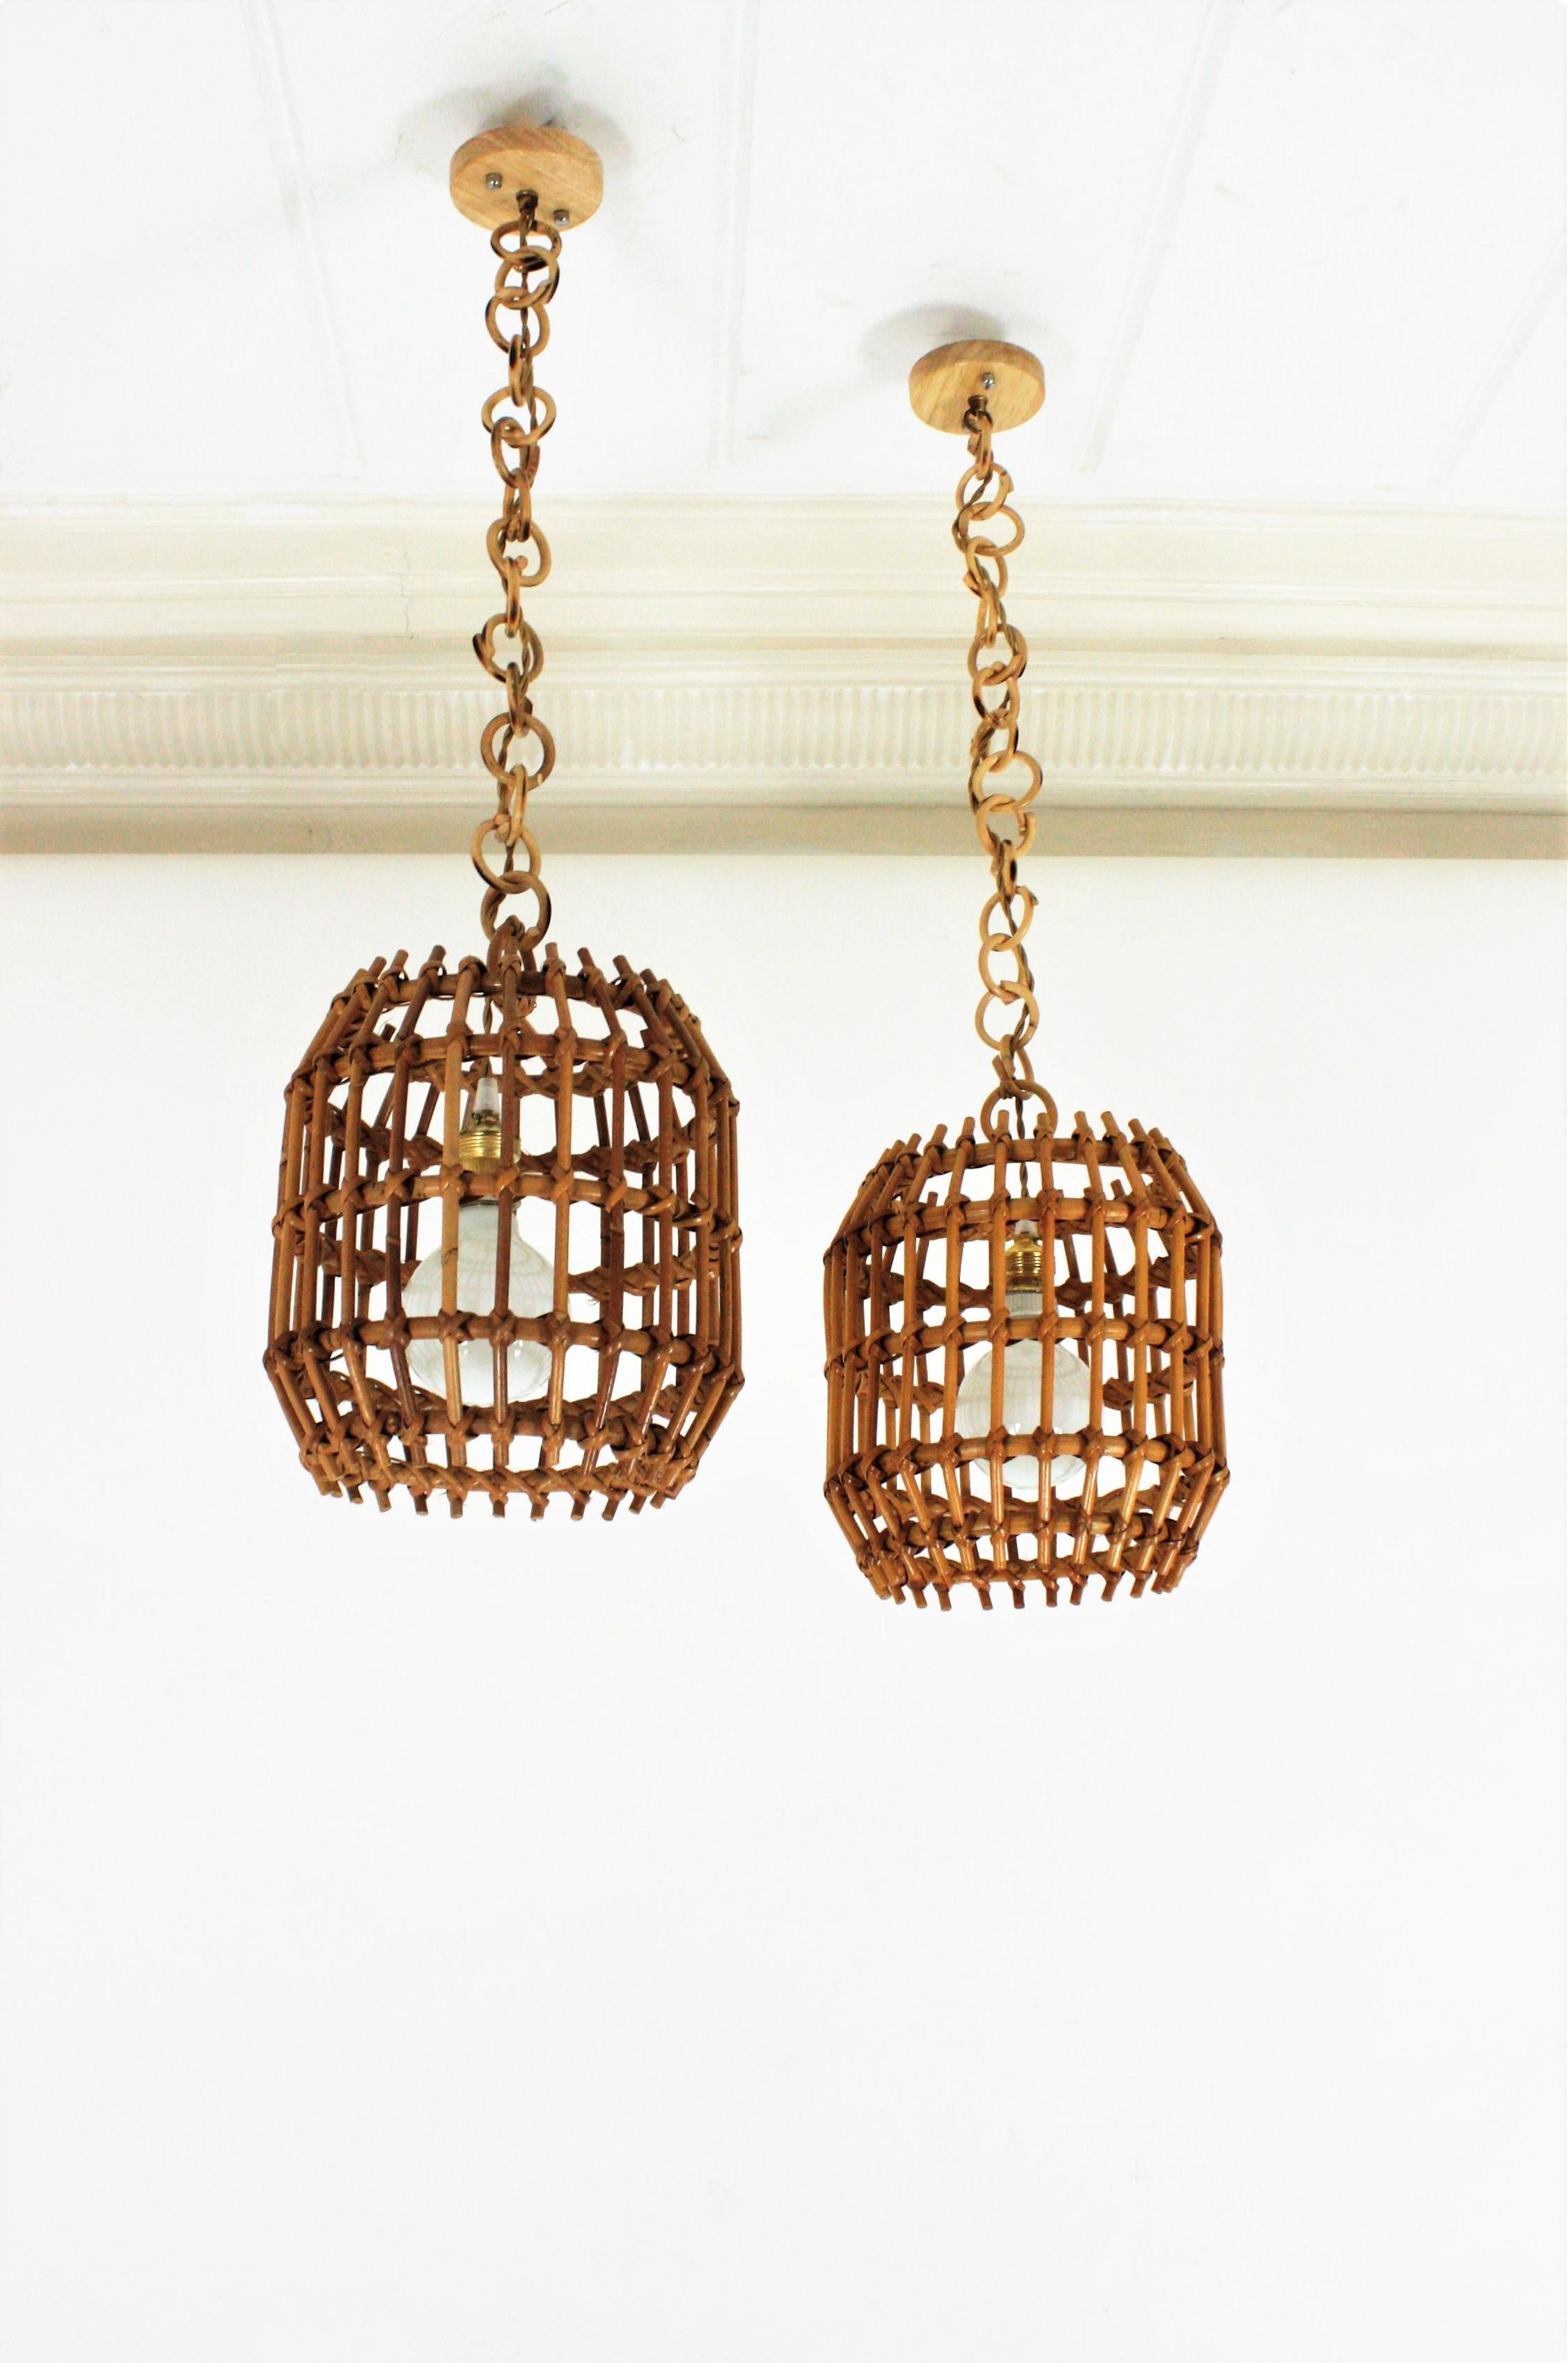 Pair of Rattan Pendant Lights or Lanterns, 1960s For Sale 4